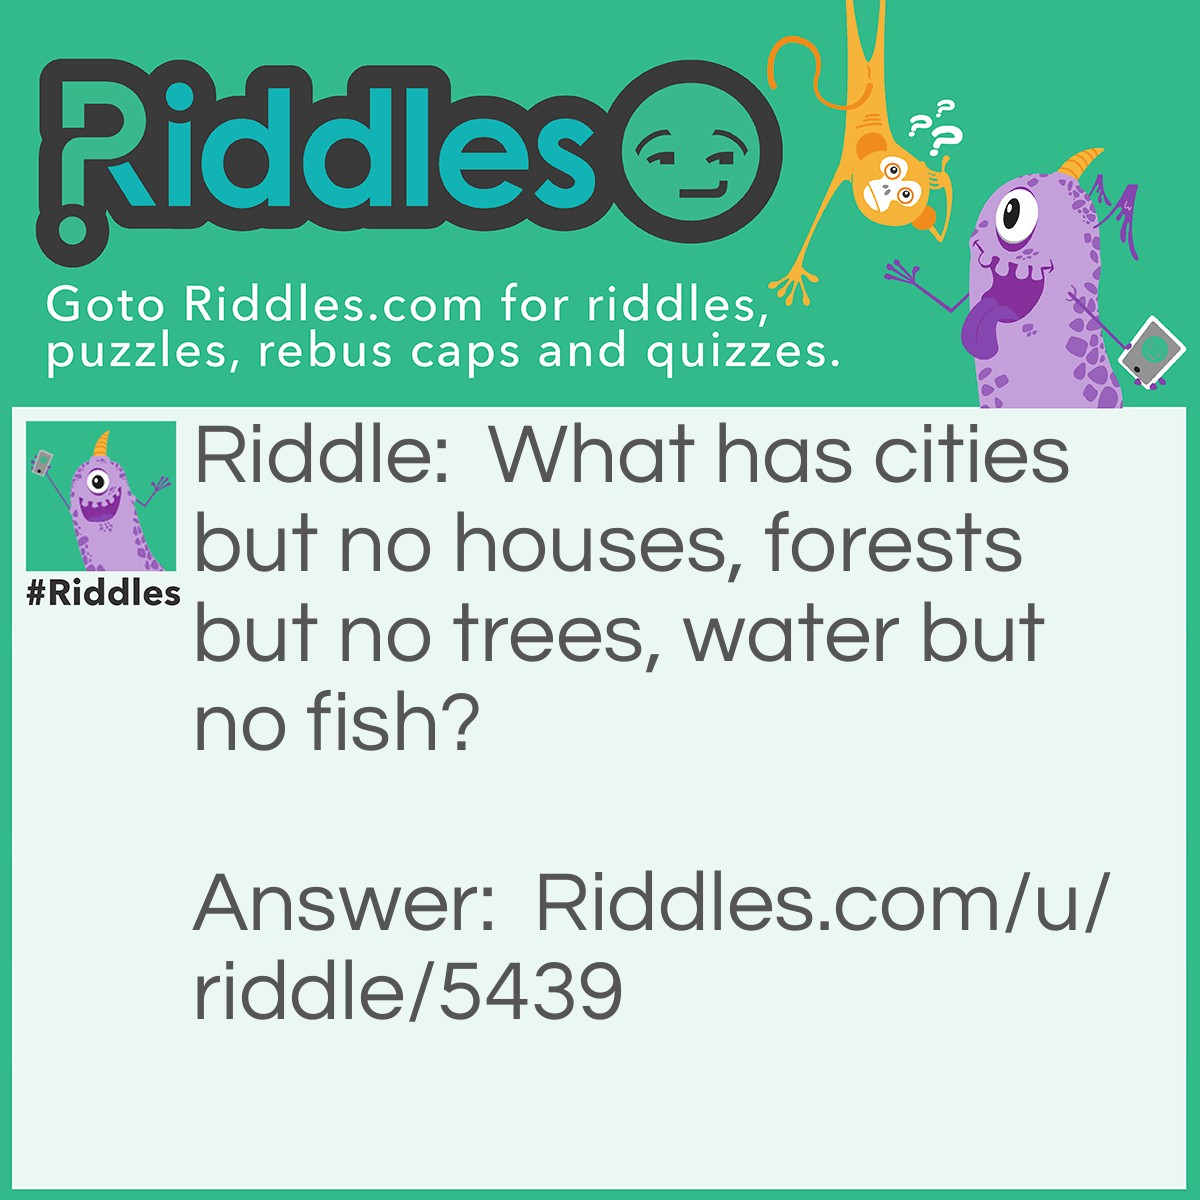 Riddle: What has cities but no houses, forests but no trees, water but no fish? Answer: A map!